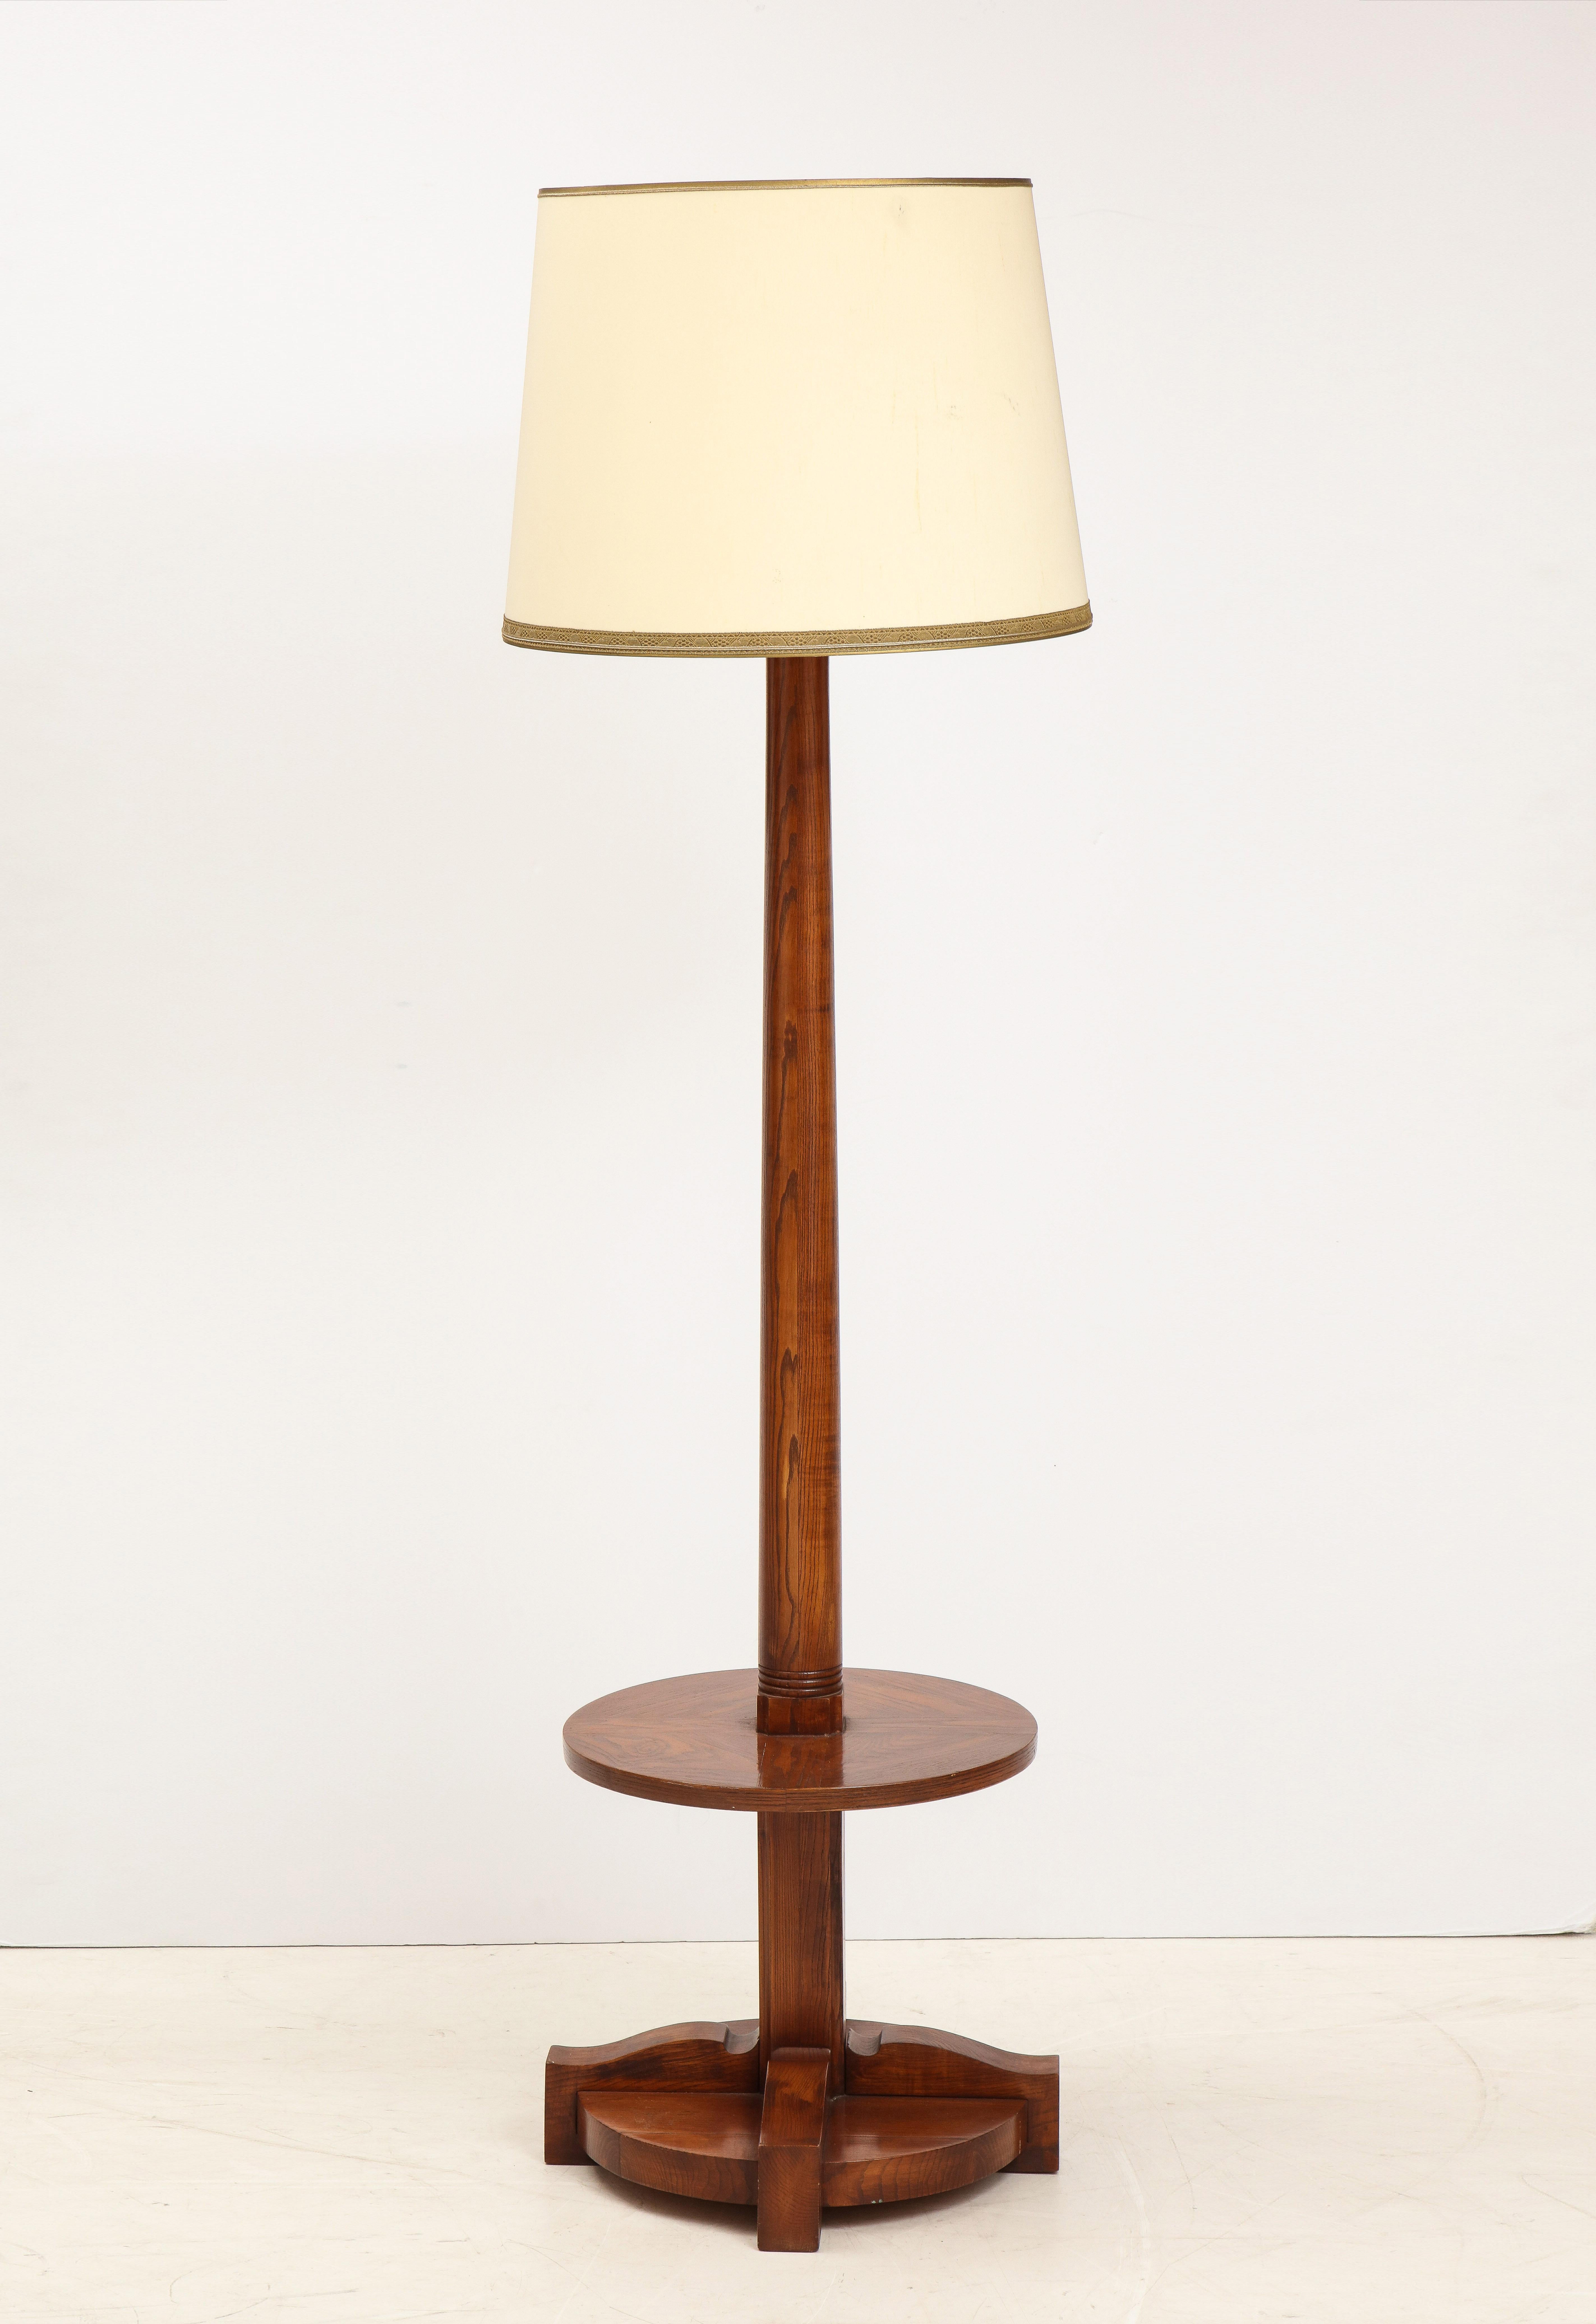 French Art Deco elmwood floor lamp gueridon in the style of Maison Dominique
height is to socket.